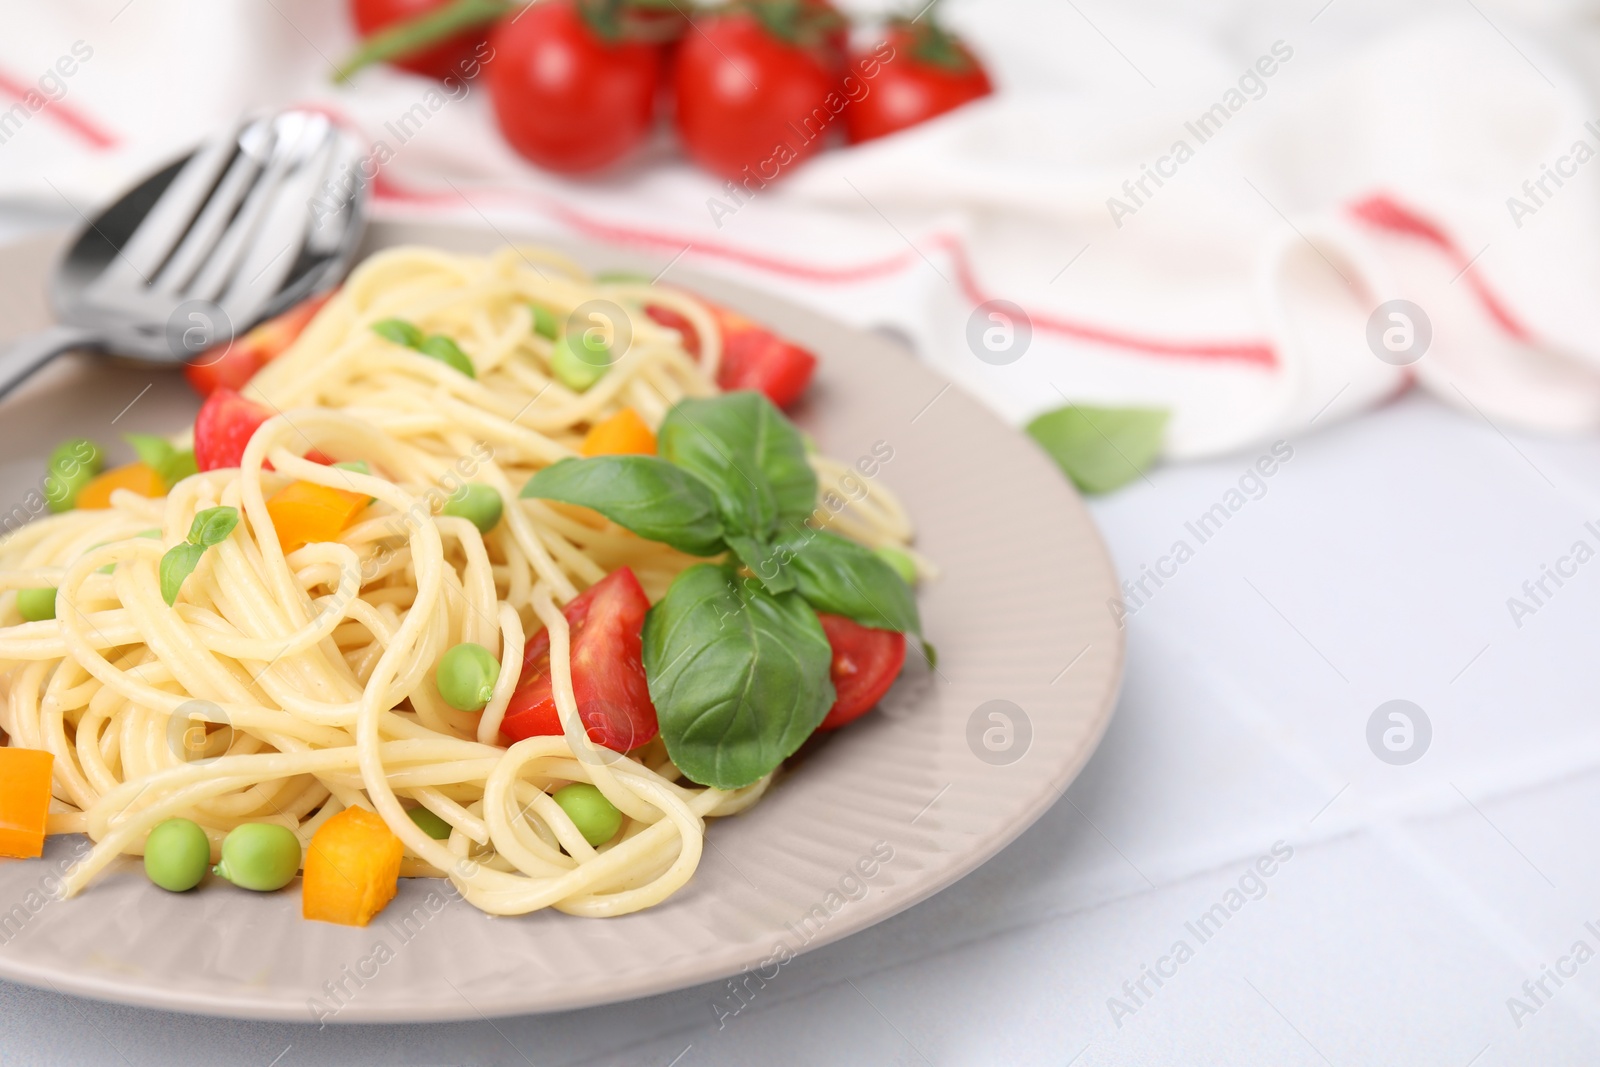 Photo of Plate of delicious pasta primavera served on white table, closeup